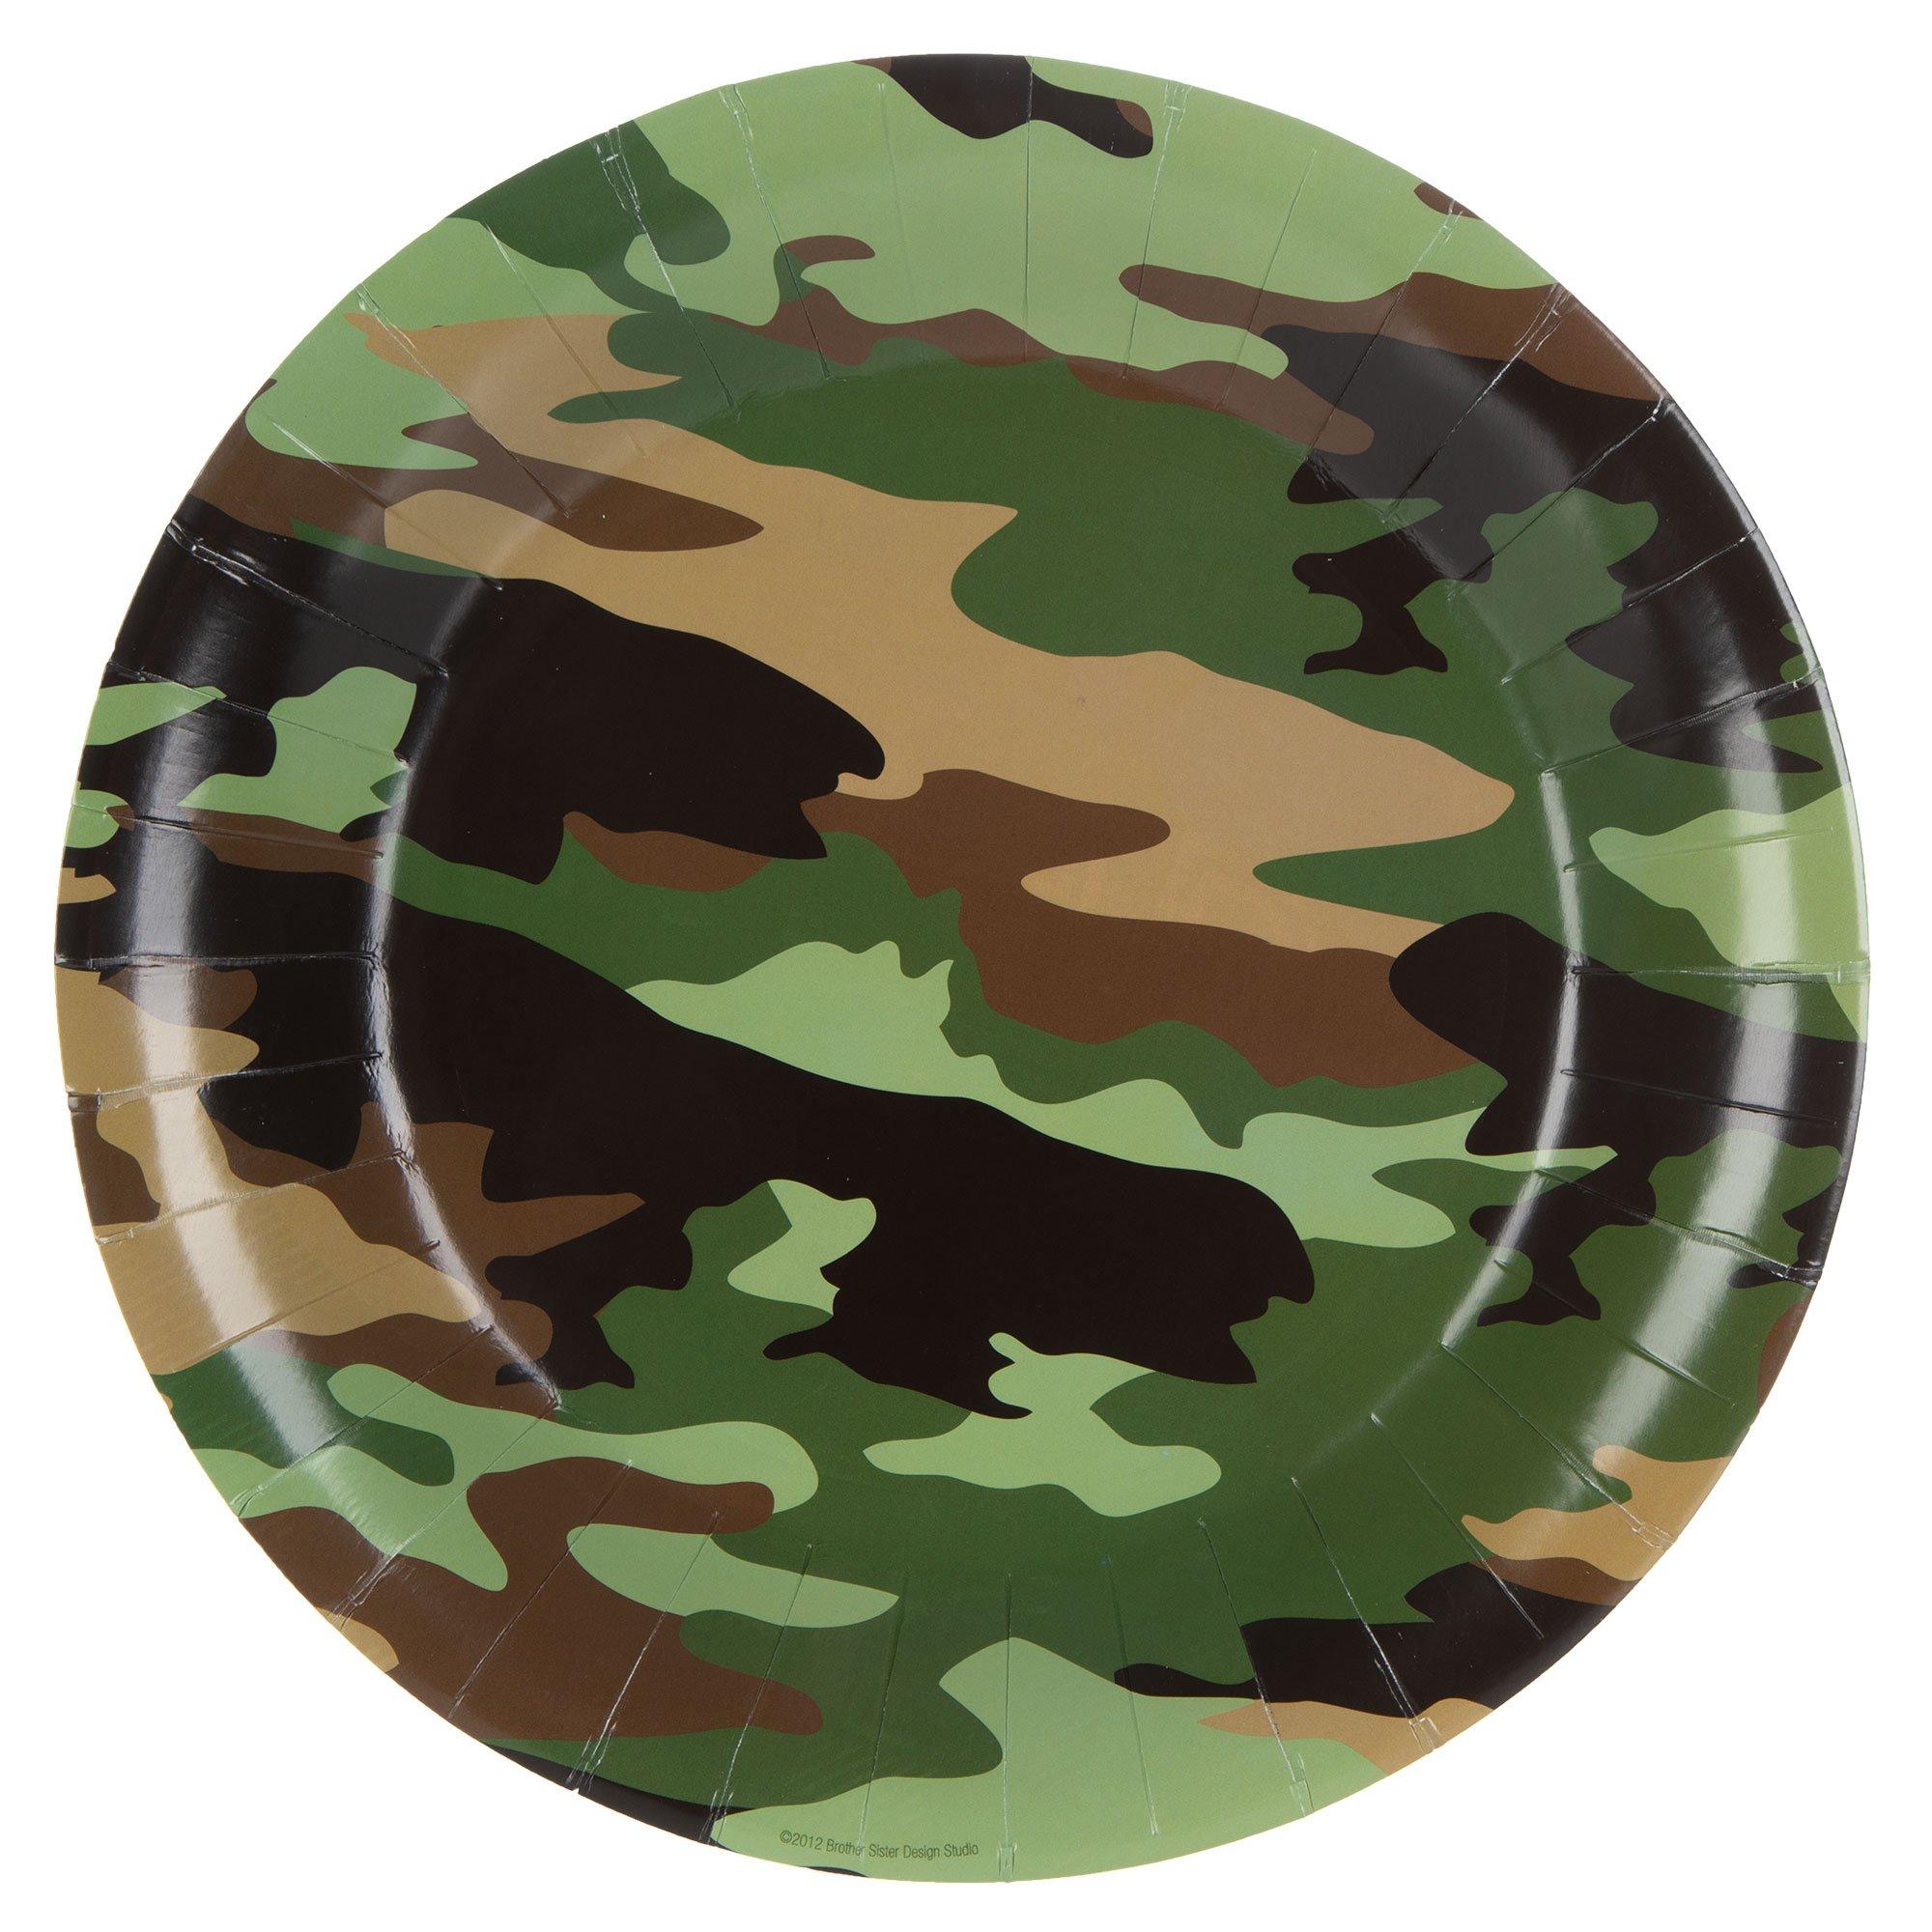 MILITARY ARMY CAMOUFLAGE CAMO PARTY SUPPLIES PLATES, CUPS, ETC.. - YOU PICK